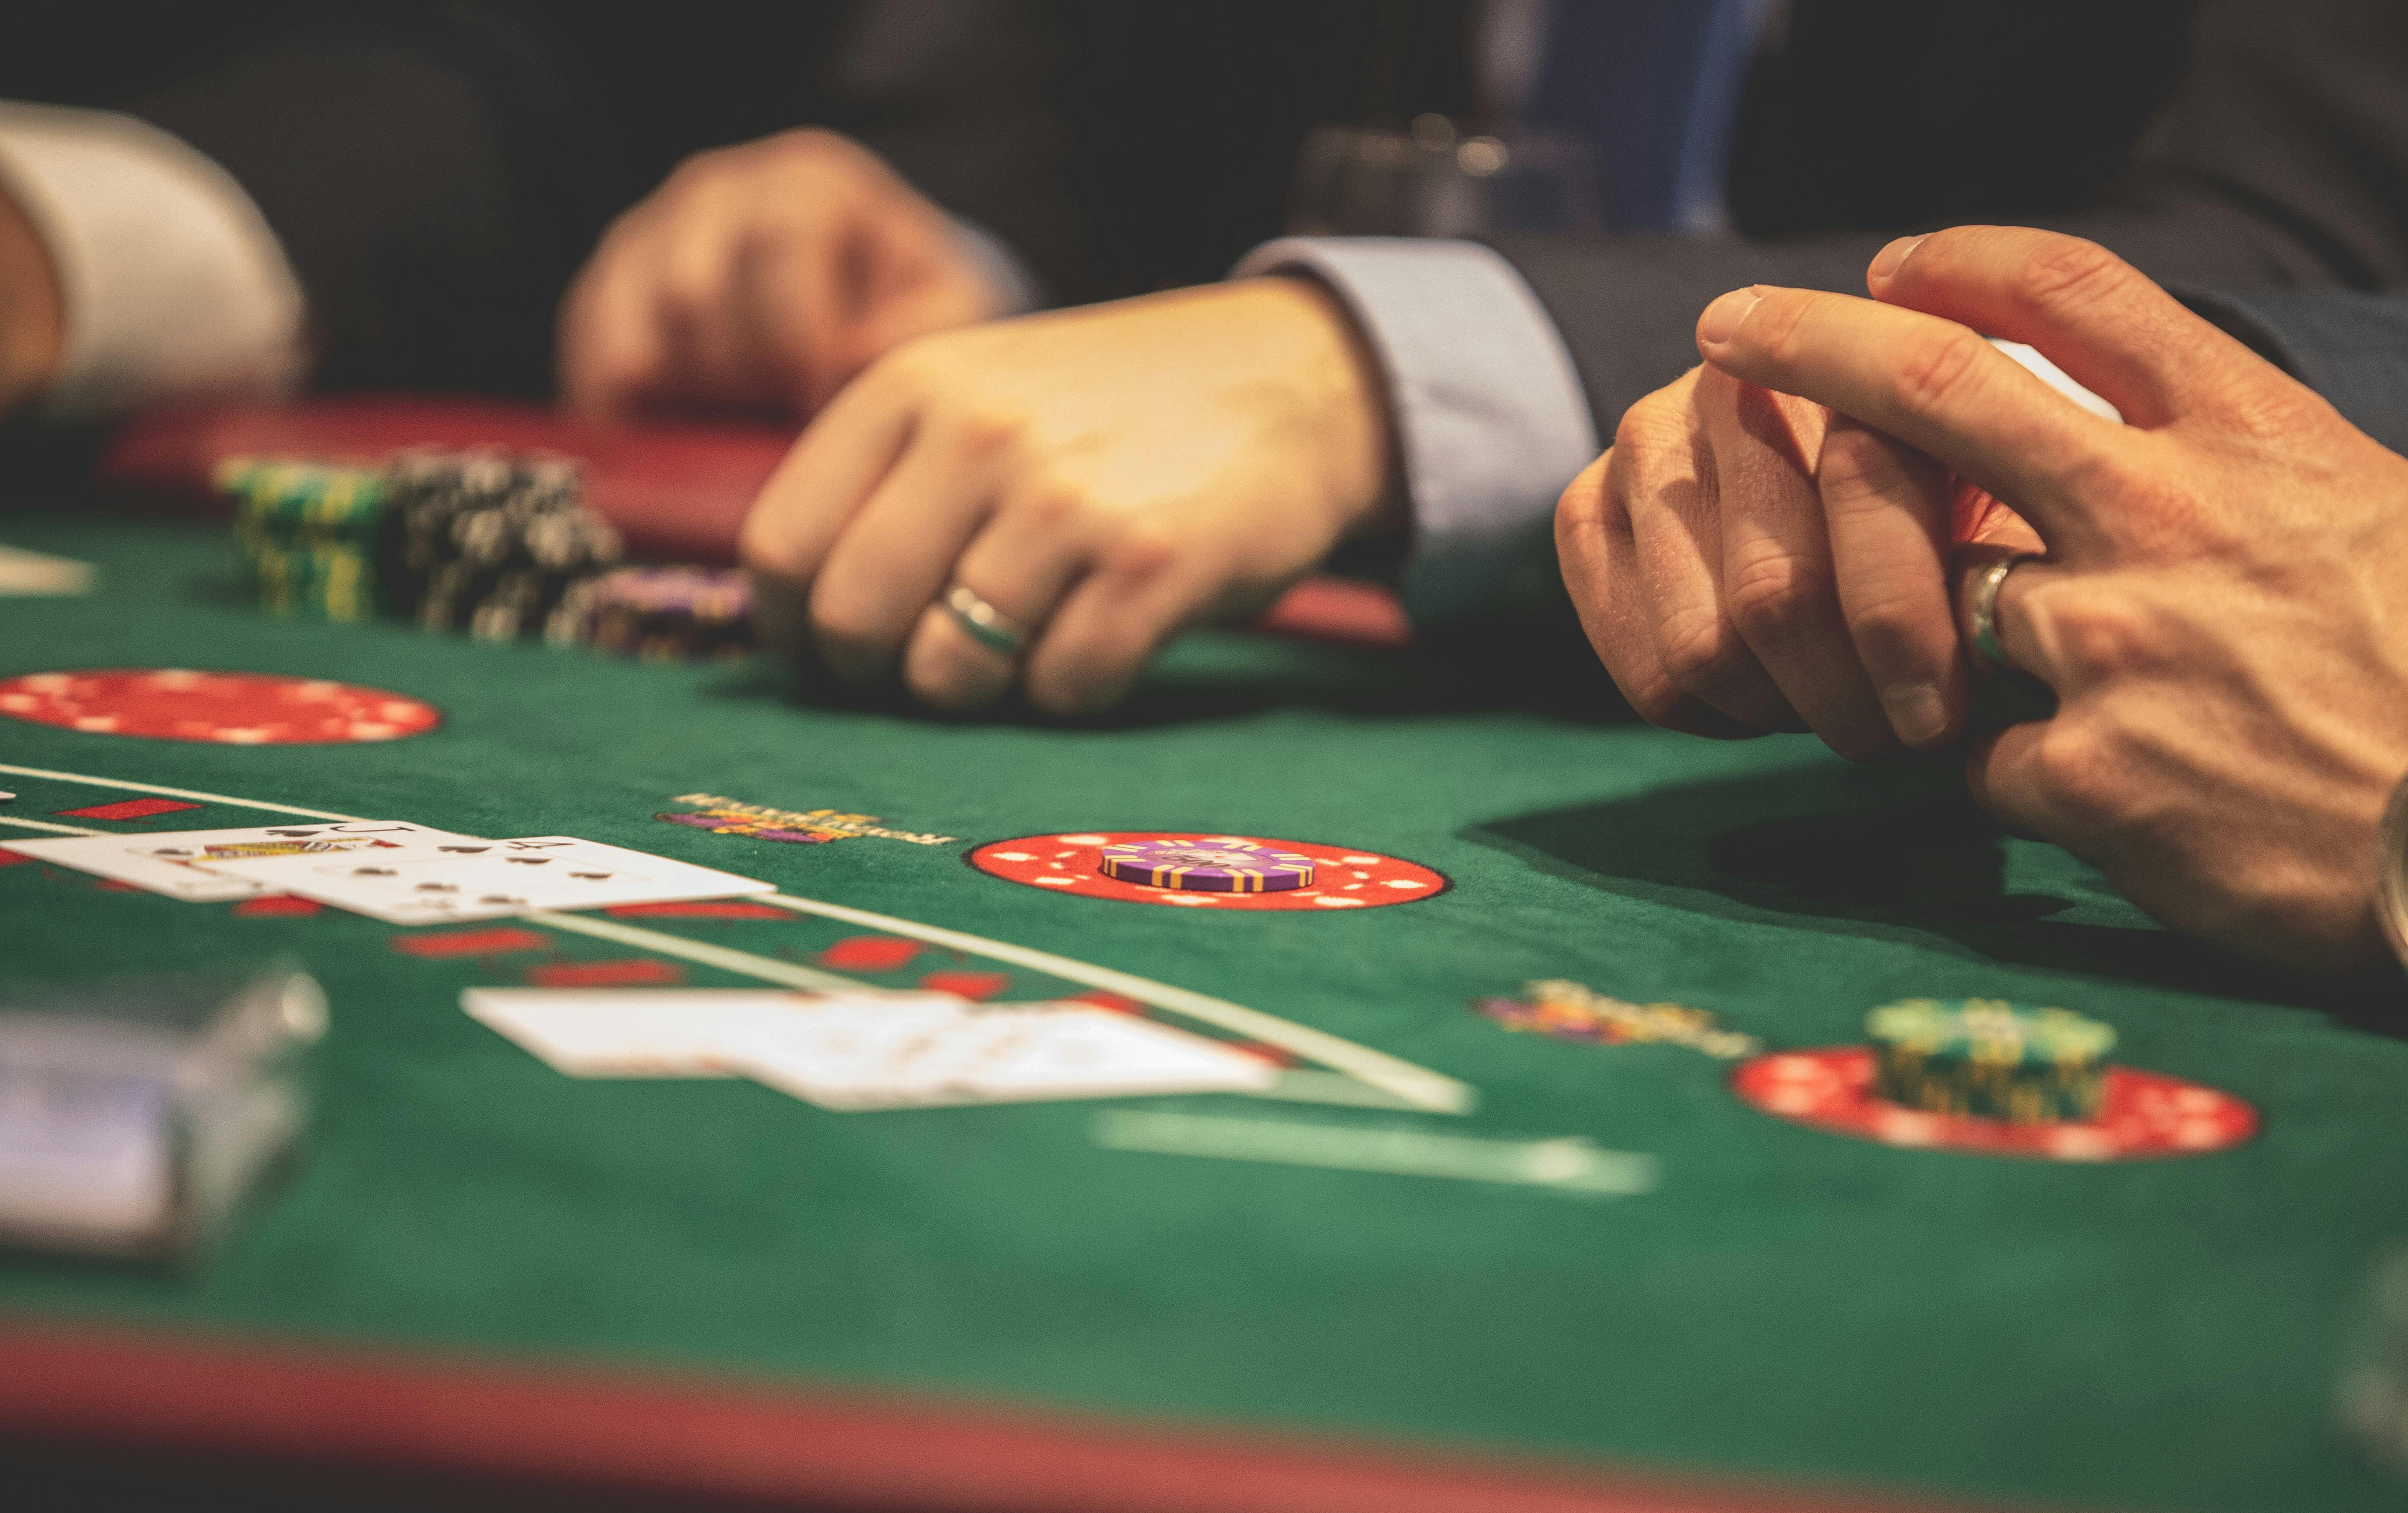 Casino Photos, Download The BEST Free Casino Stock Photos & HD Images